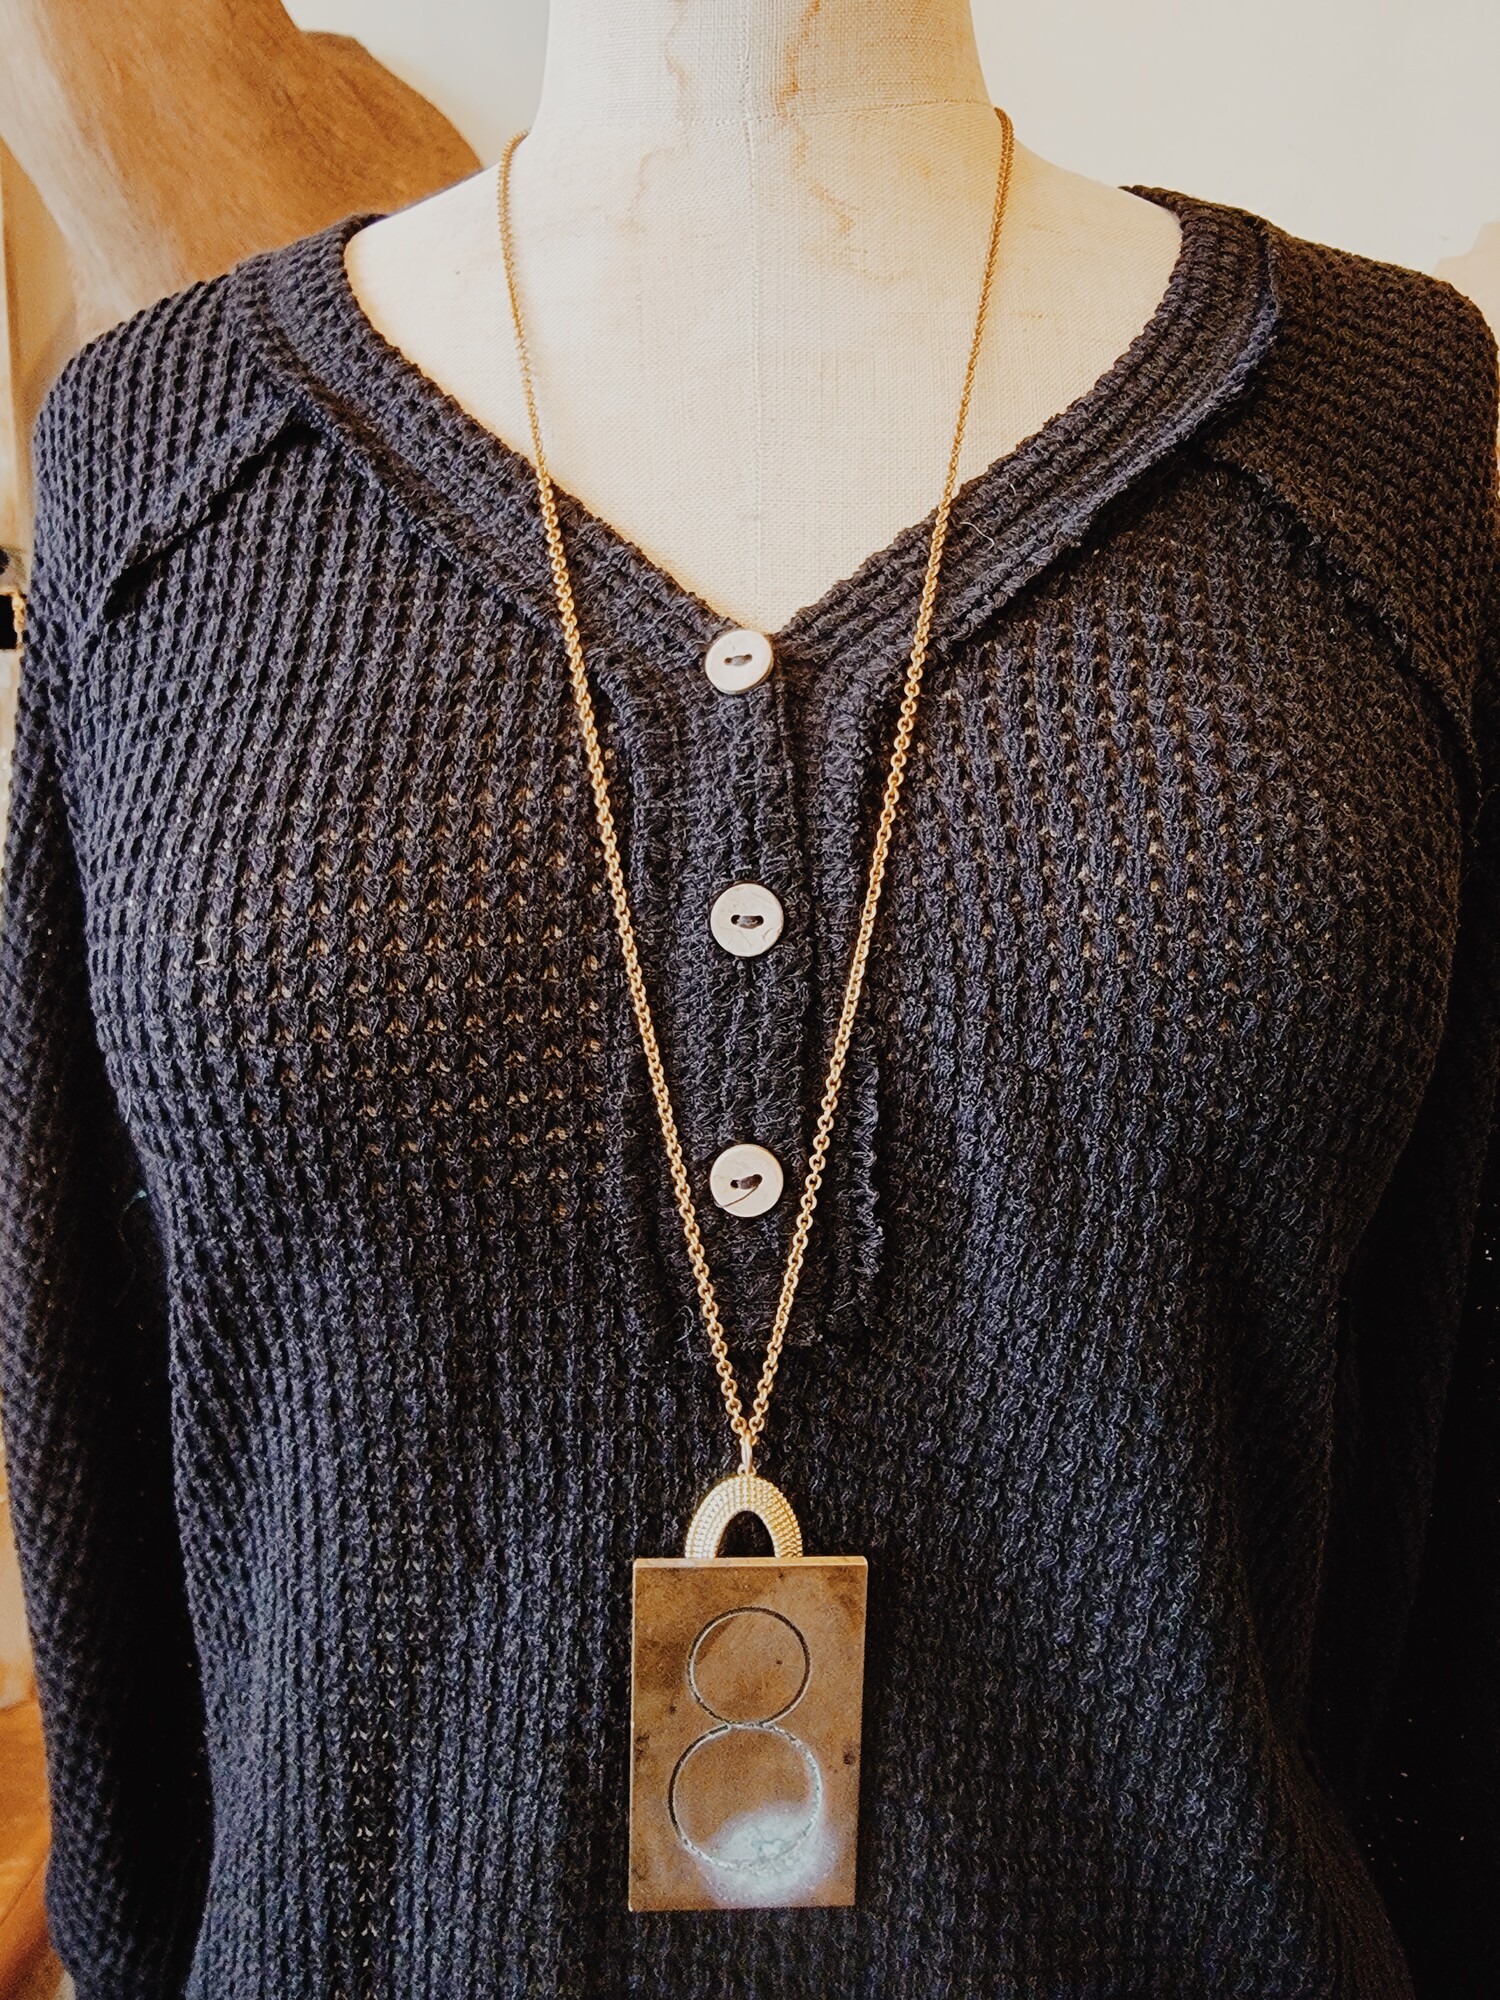 This neckalce with an 8 engraved brass plate was handmade! It is on a 34 inch chain.